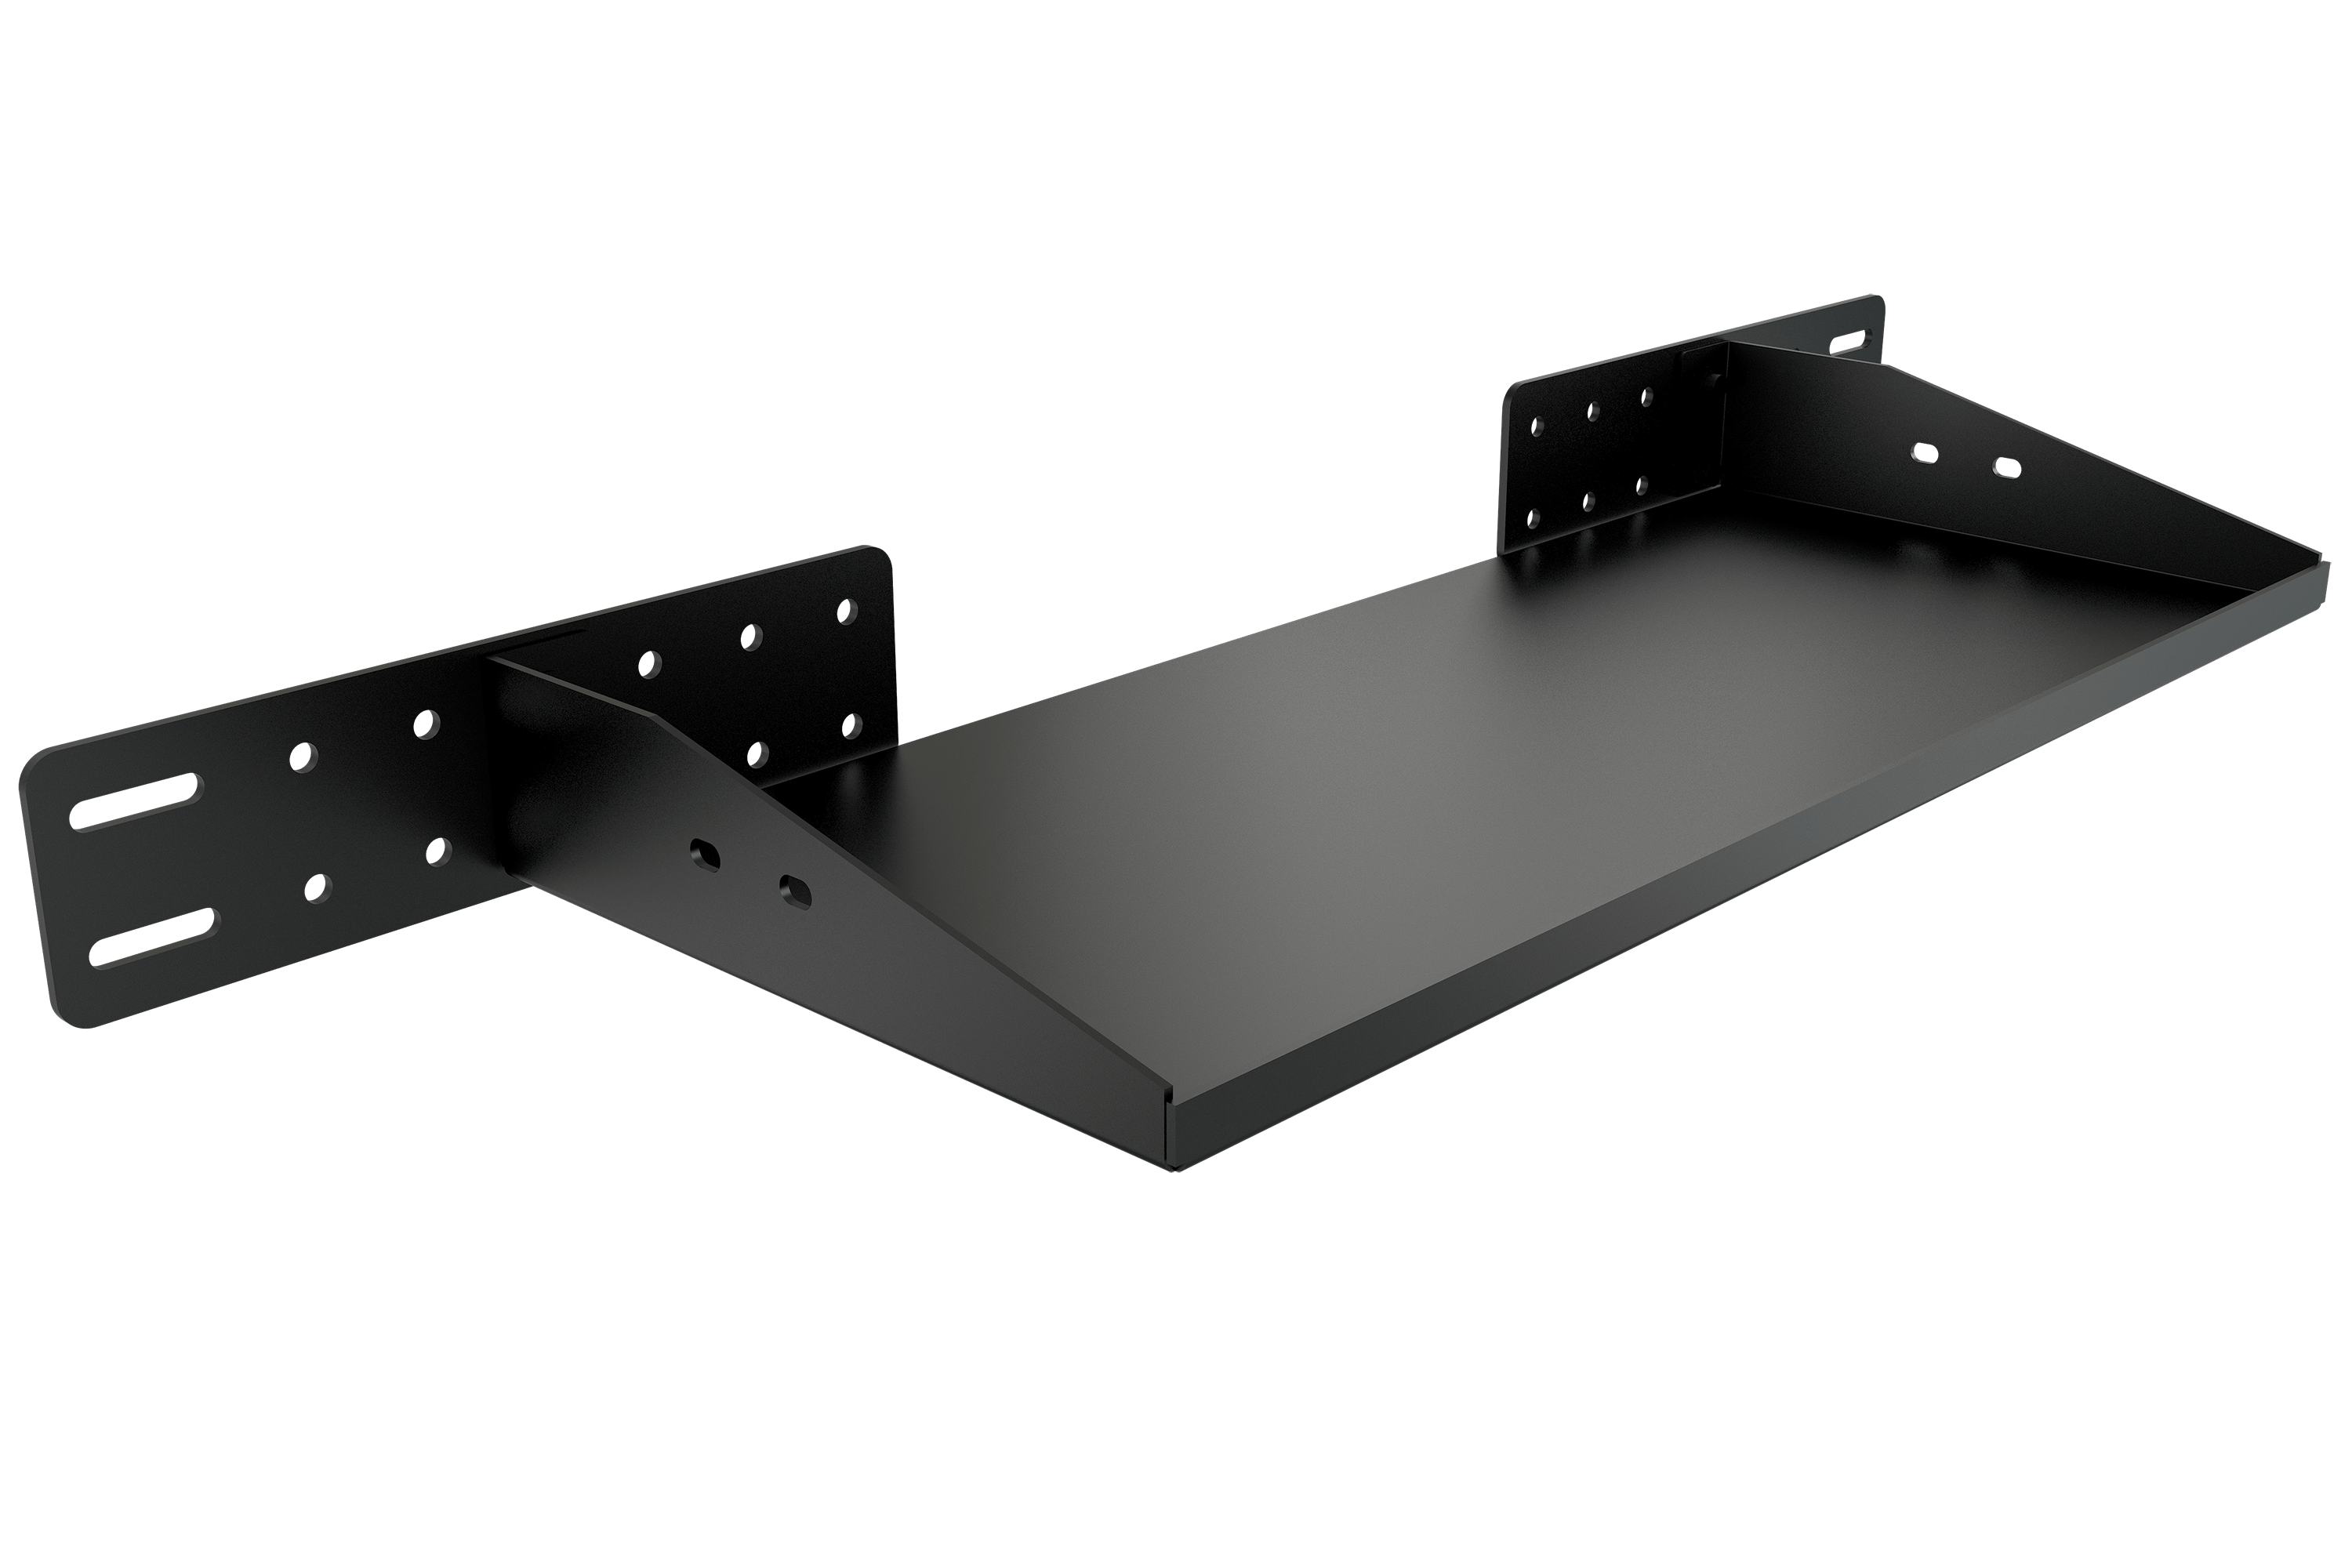 Universal PC or Control Box Shelf for for Aluminium Extrusion Mounting